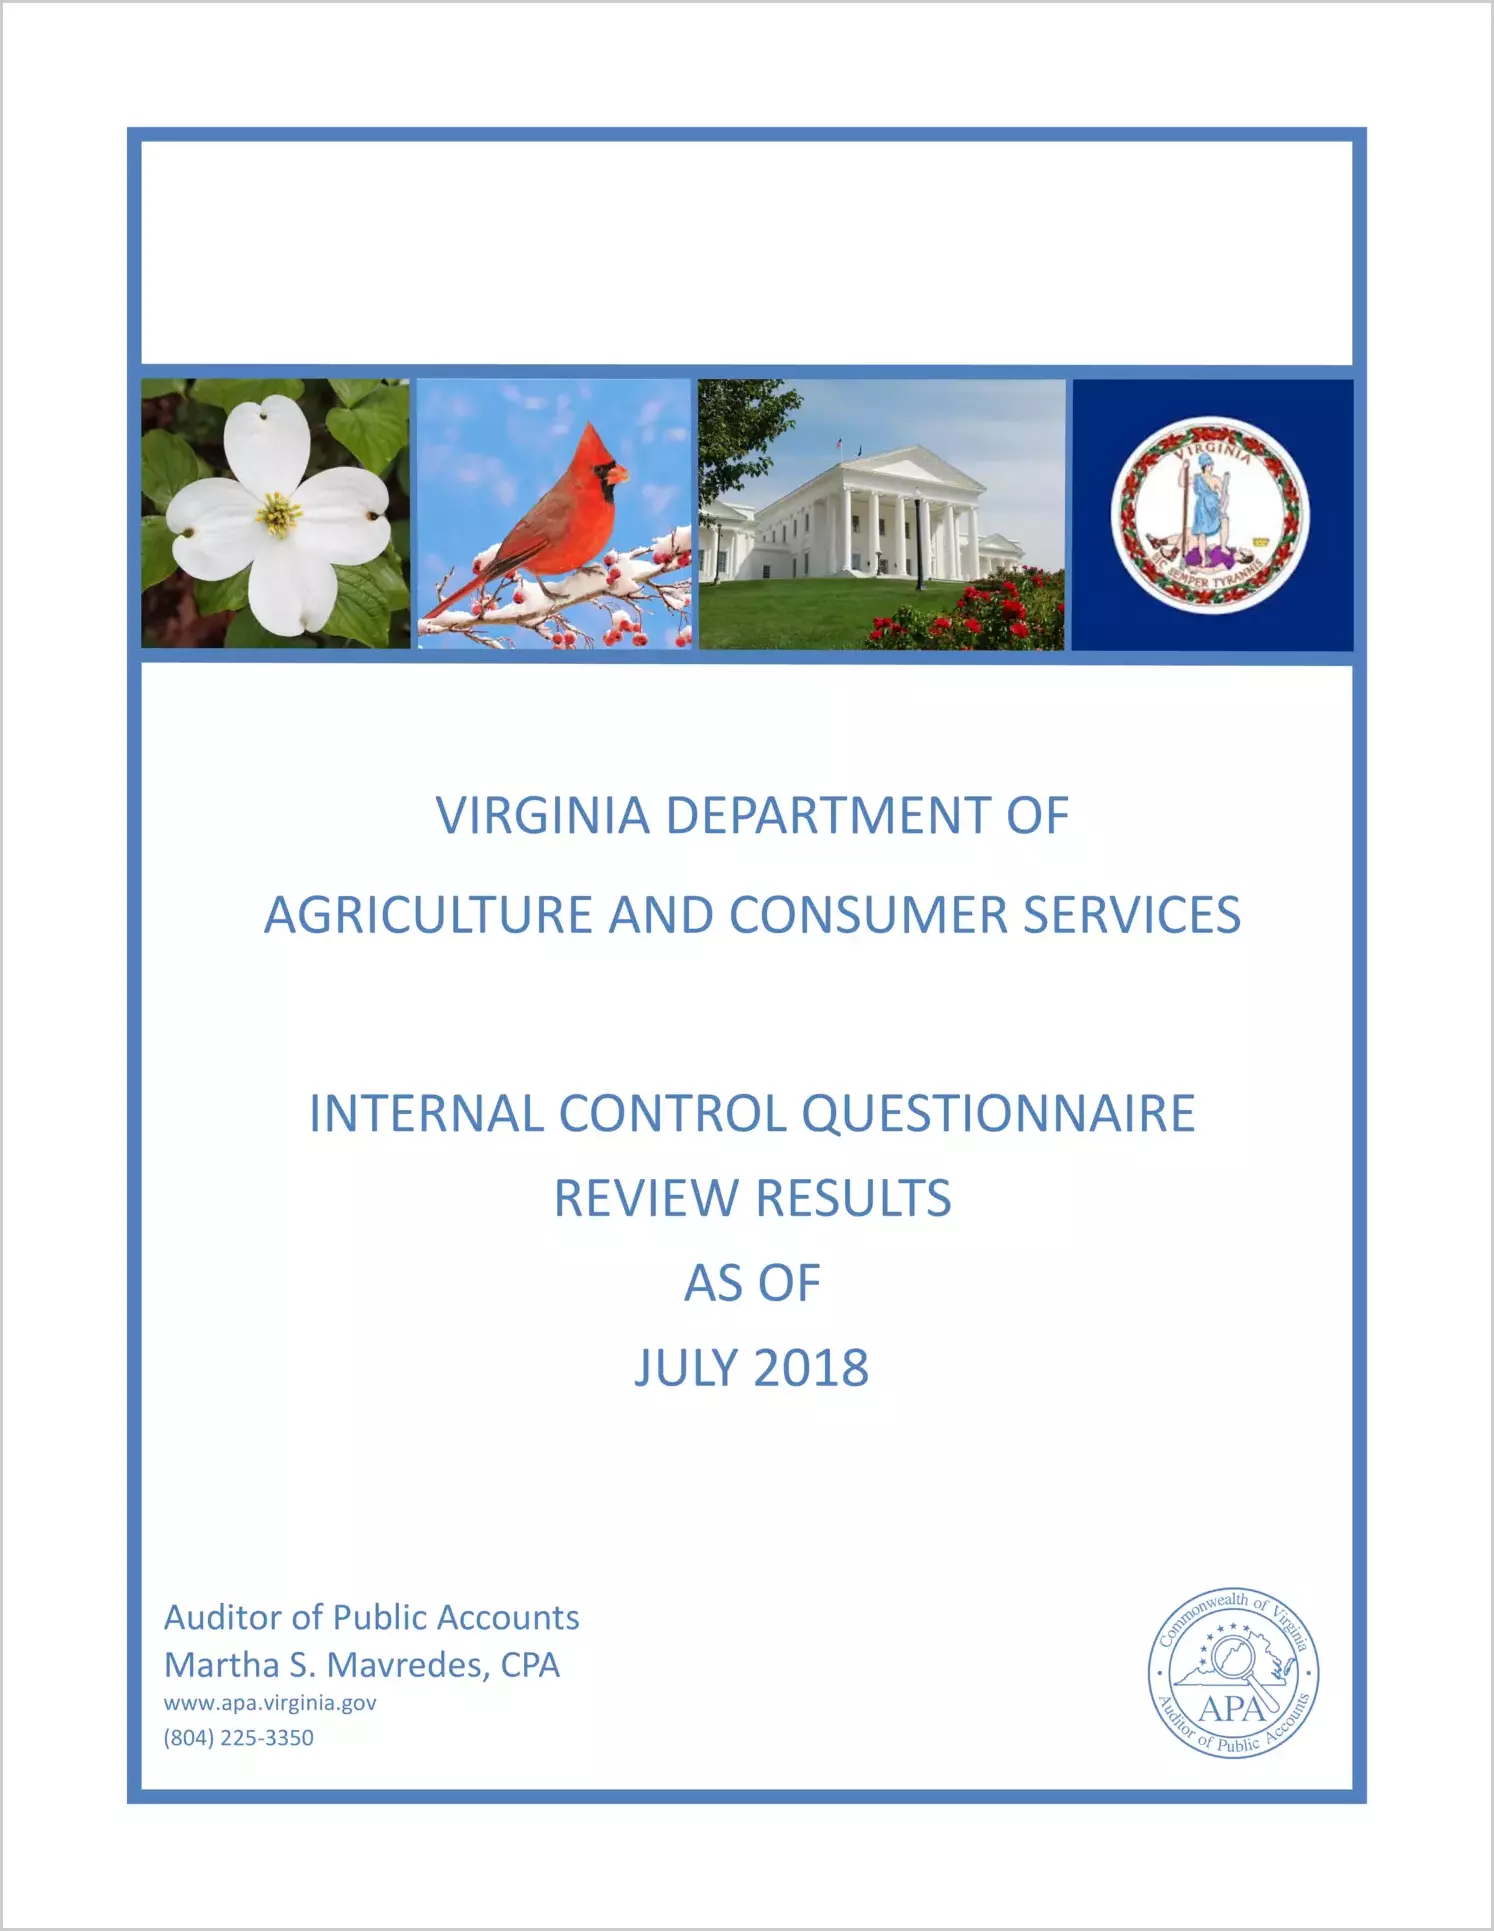 Virginia Department of Agriculture and Consumer Services Internal Control Questionnaire Review Results as of July 2018